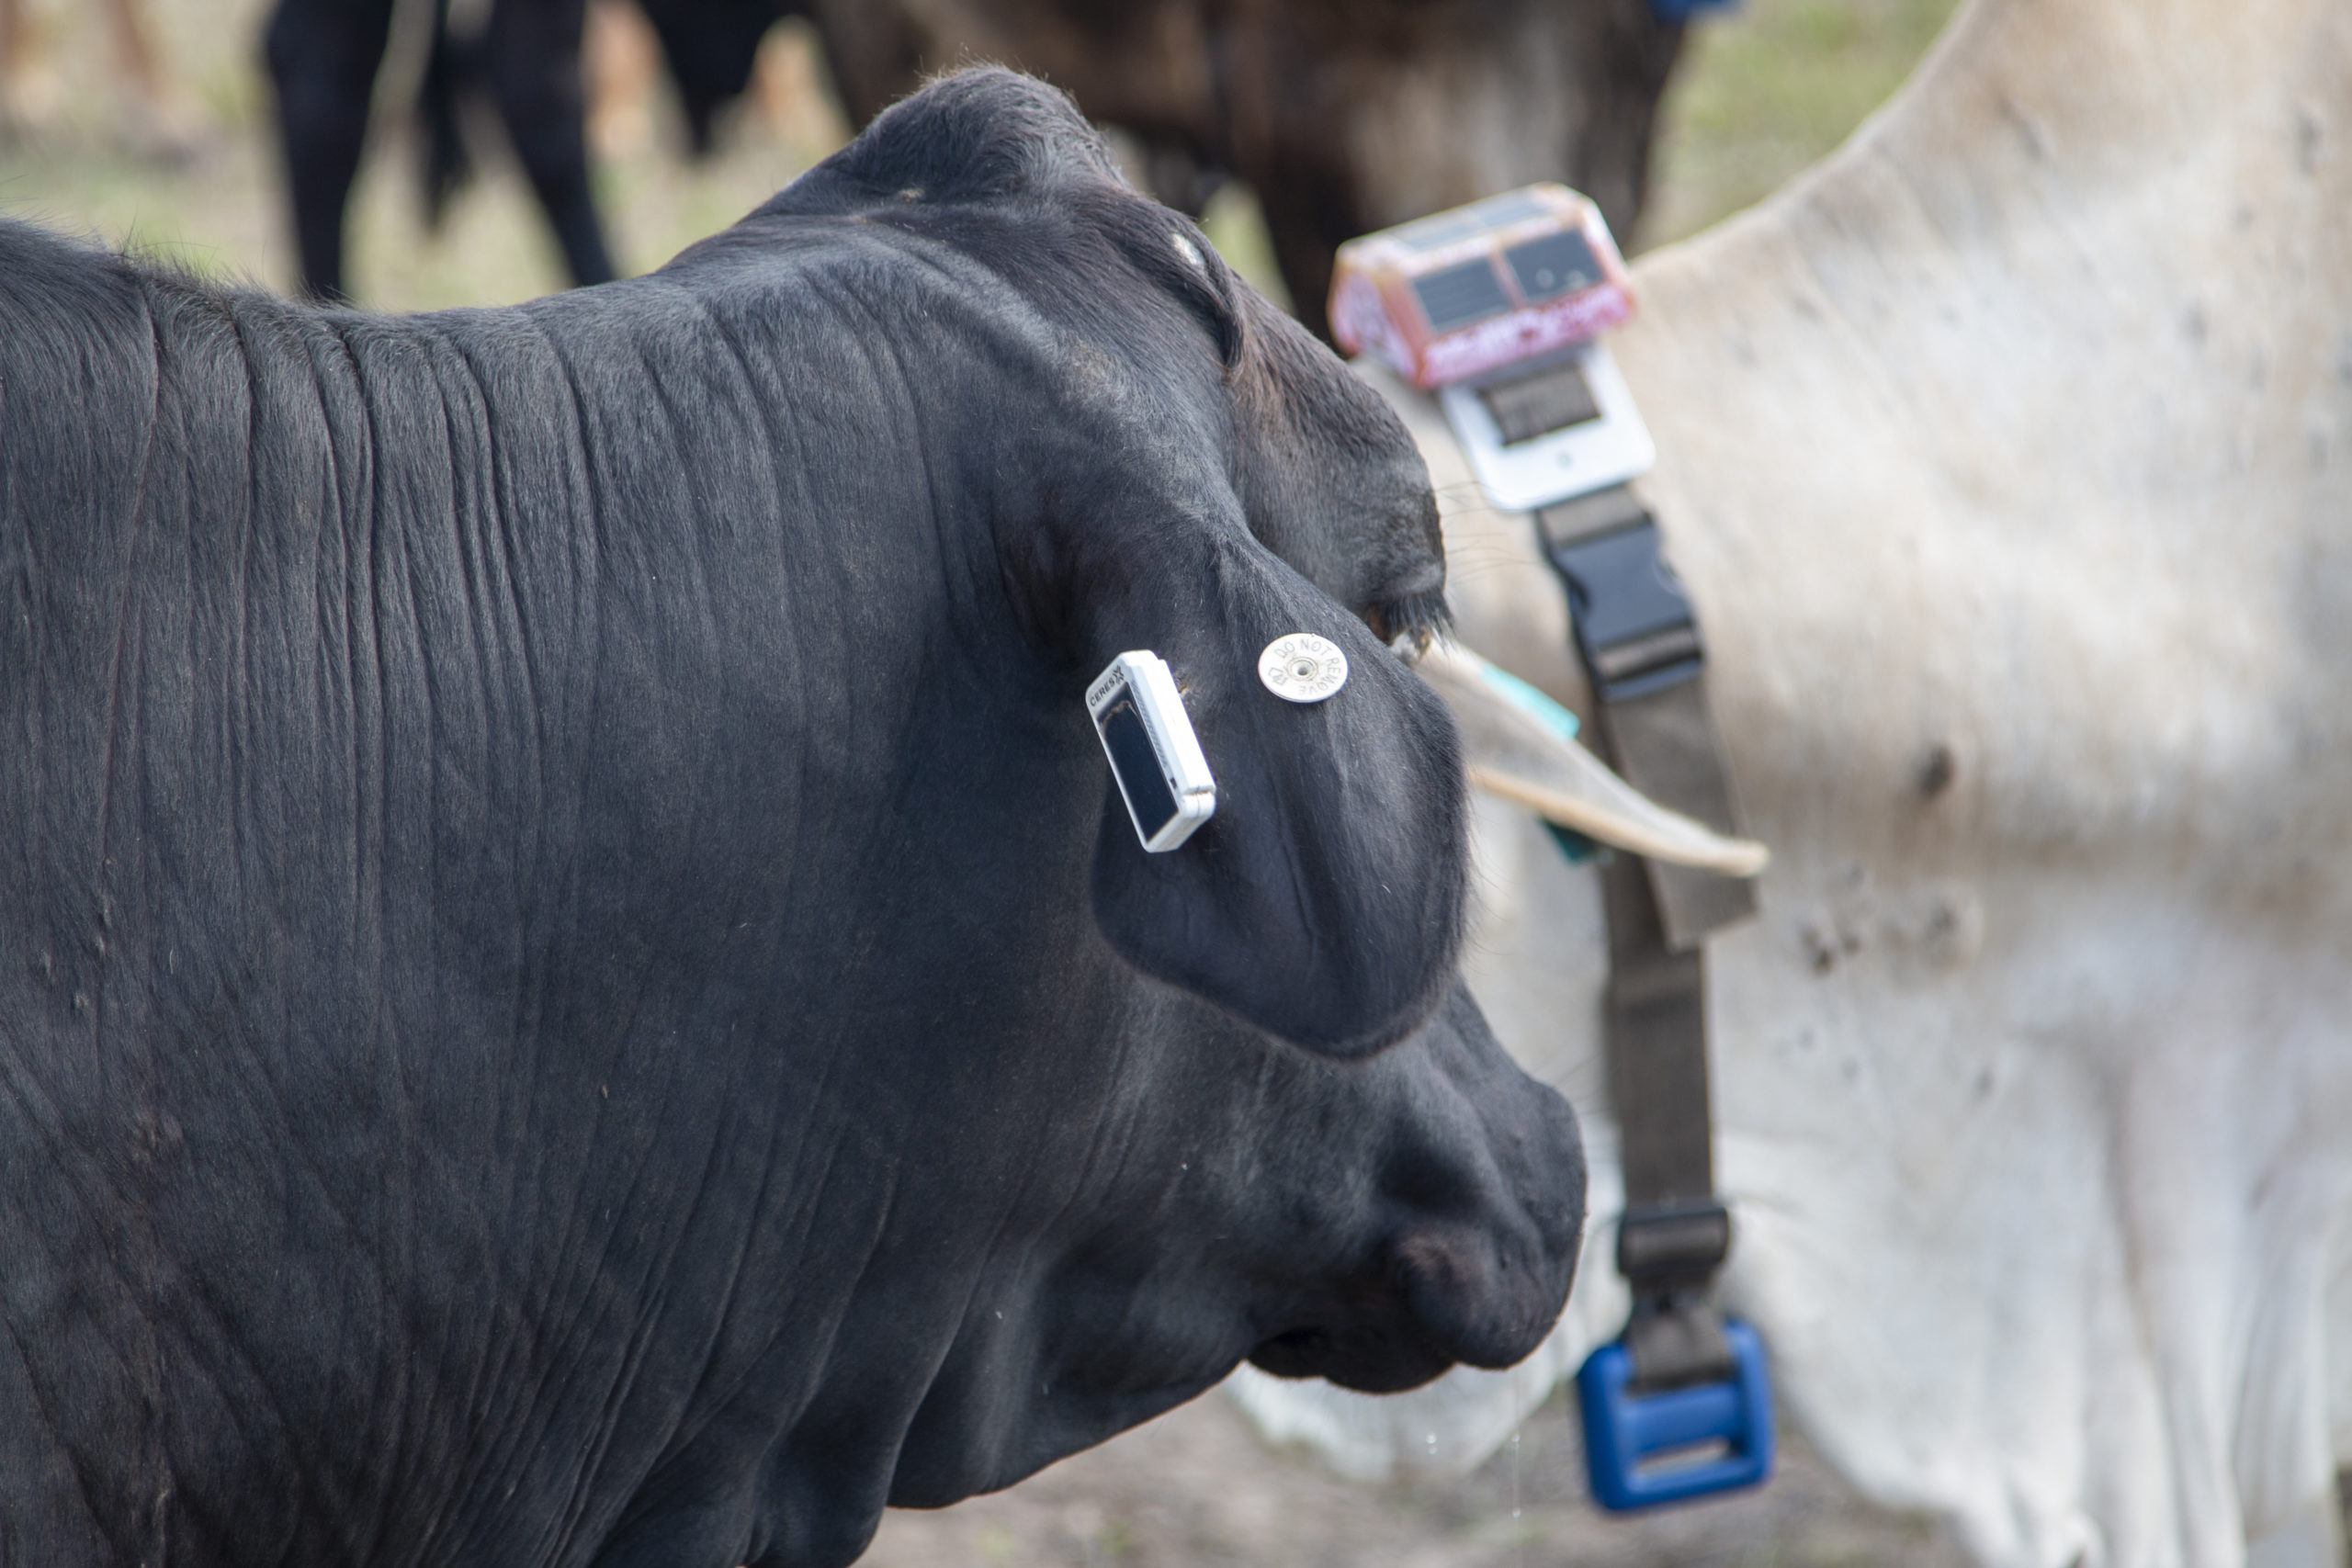 A cow with tags in its ear